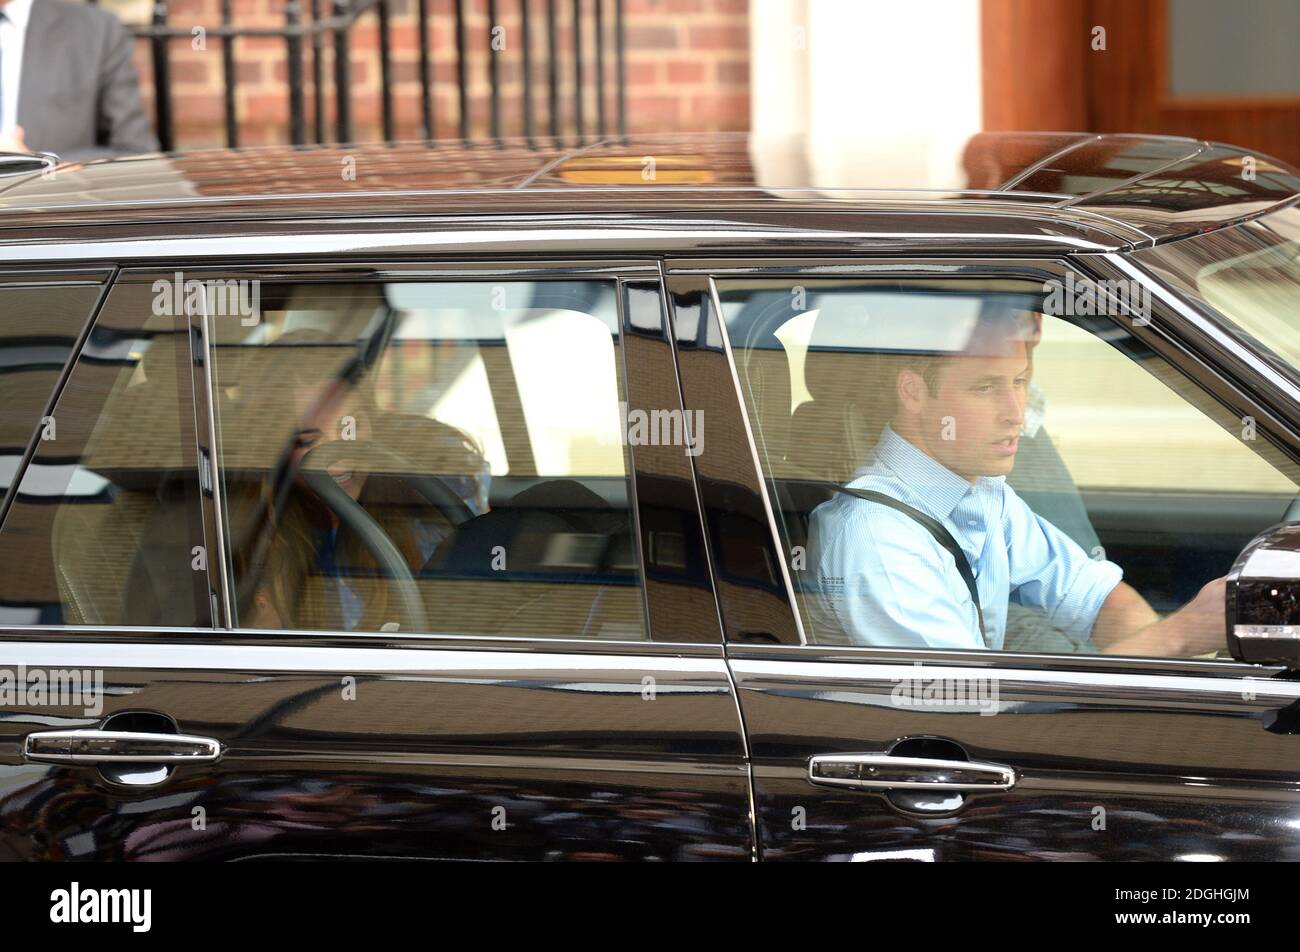 Prince William and Kate Middleton, The Duke and Duchess of Cambridge drive away from the Lindo Wing of St Mary's Hospital with their new born baby boy, Paddington, London. Stock Photo